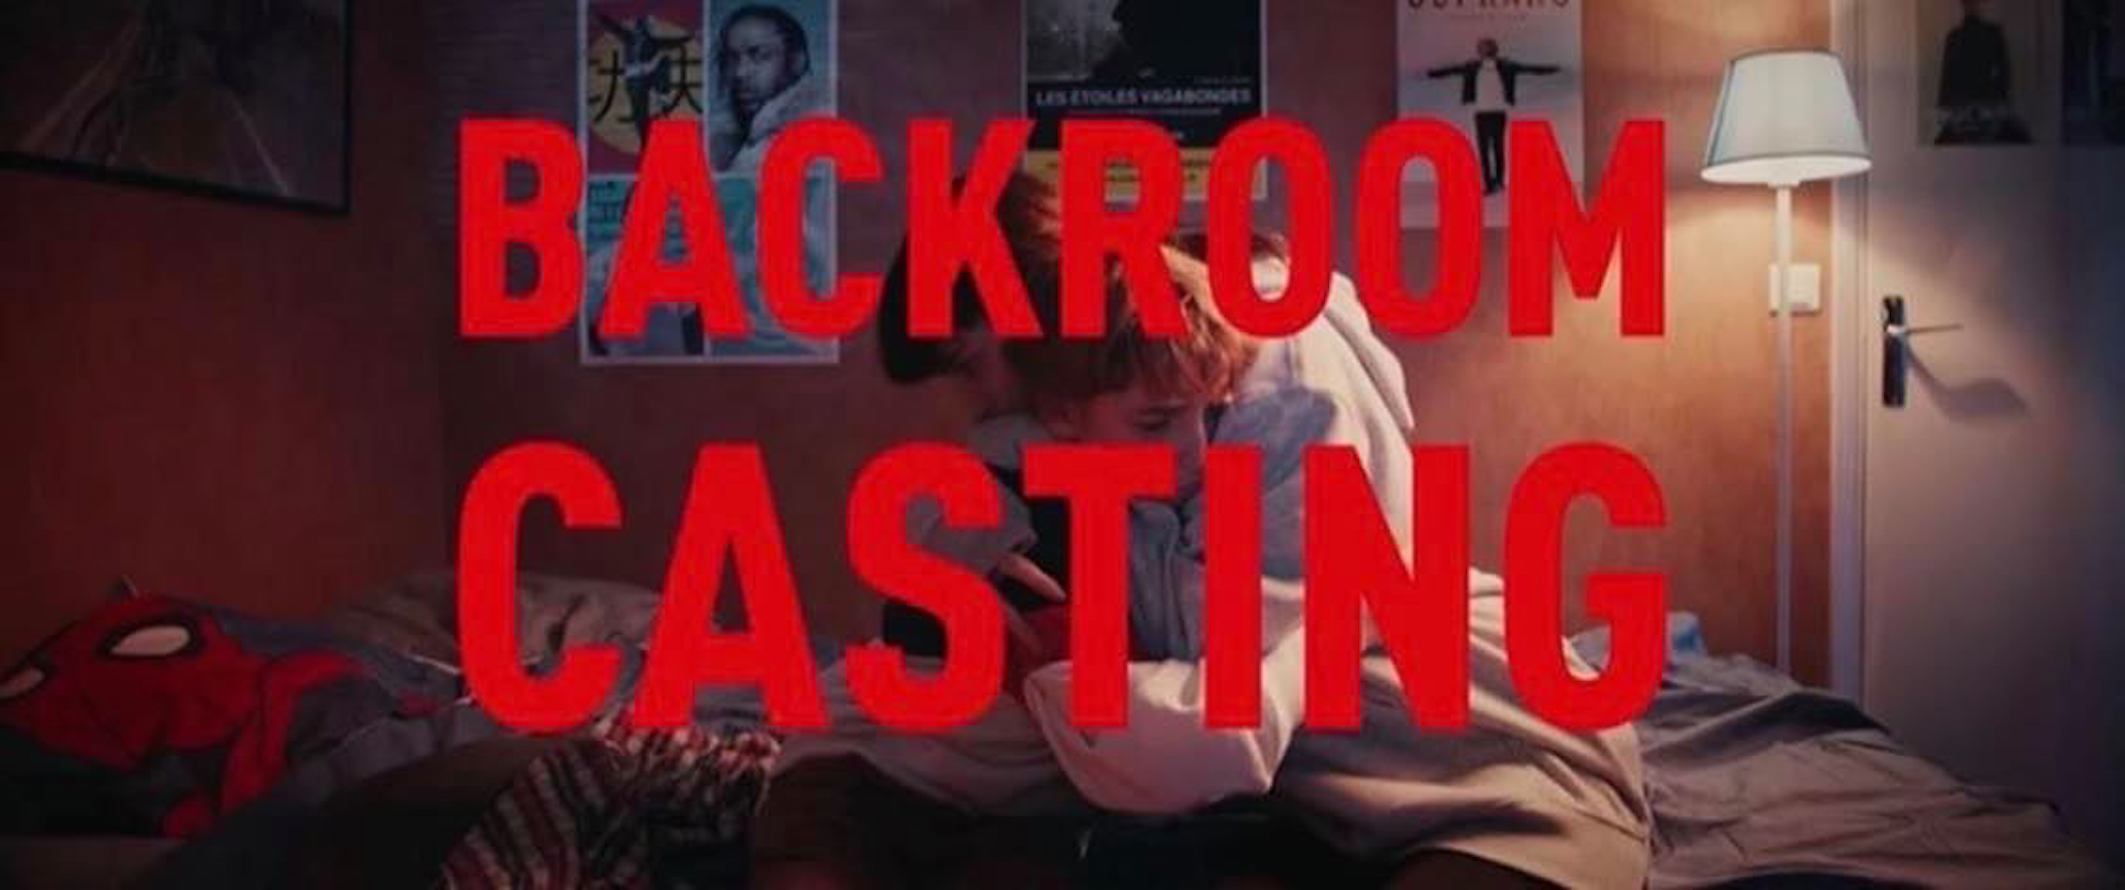 christy maze recommends is backroom casting real pic